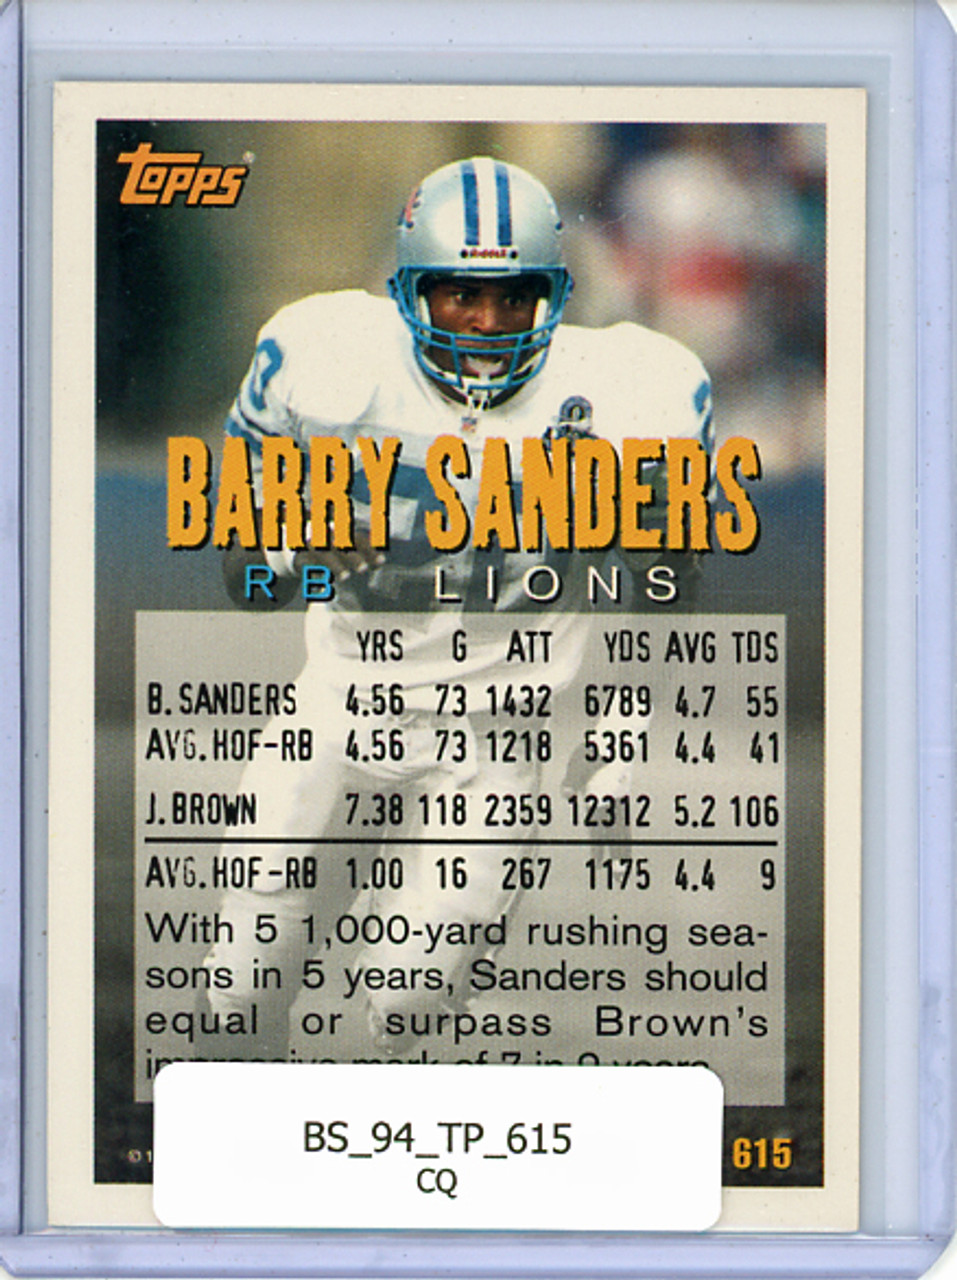 Barry Sanders 1994 Topps #615 Measures of Greatness (CQ)